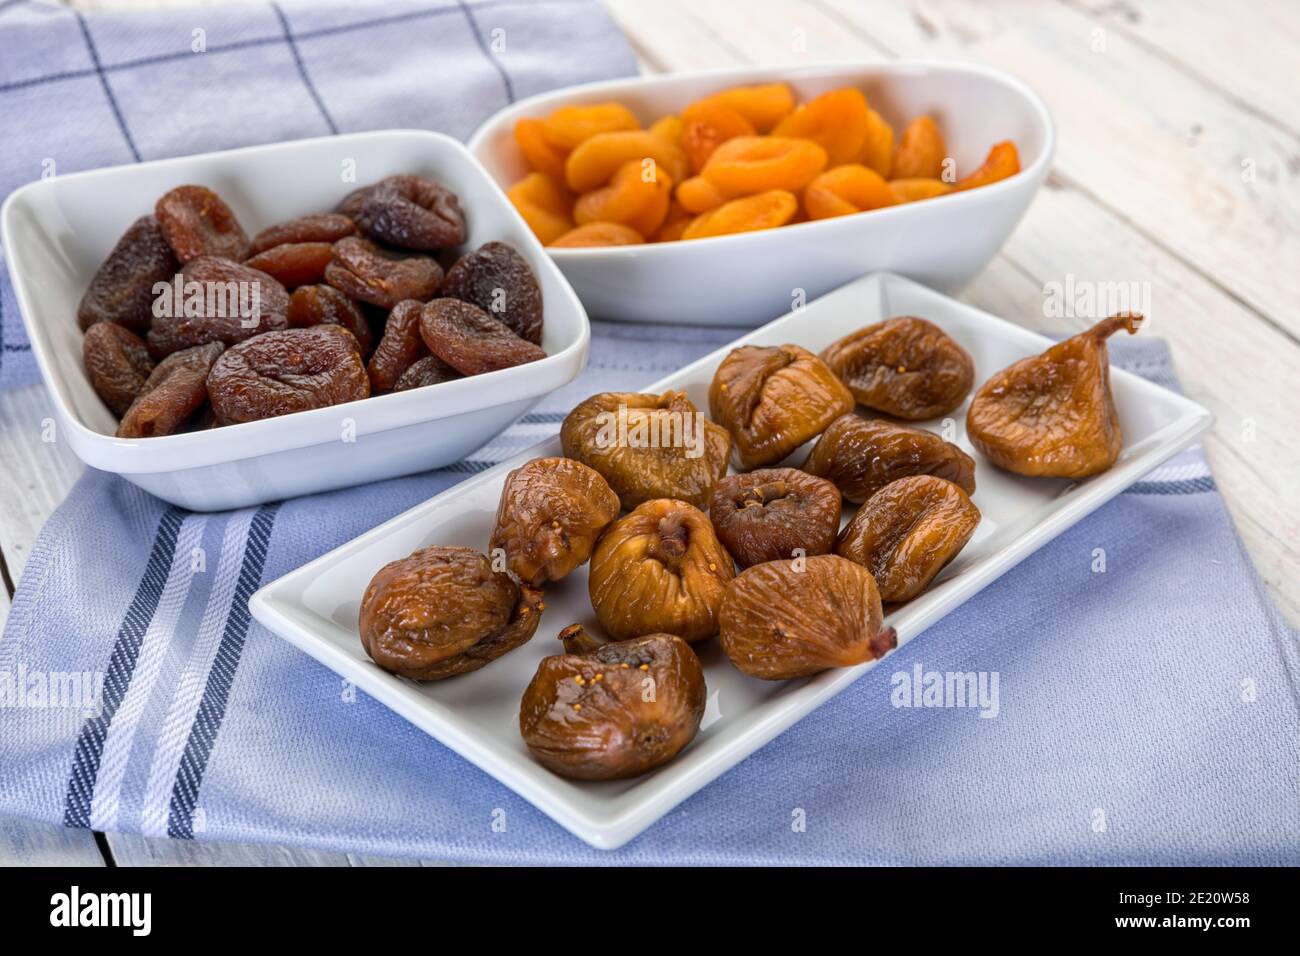 Variety of dried fruit in bowls on table Stock Photo